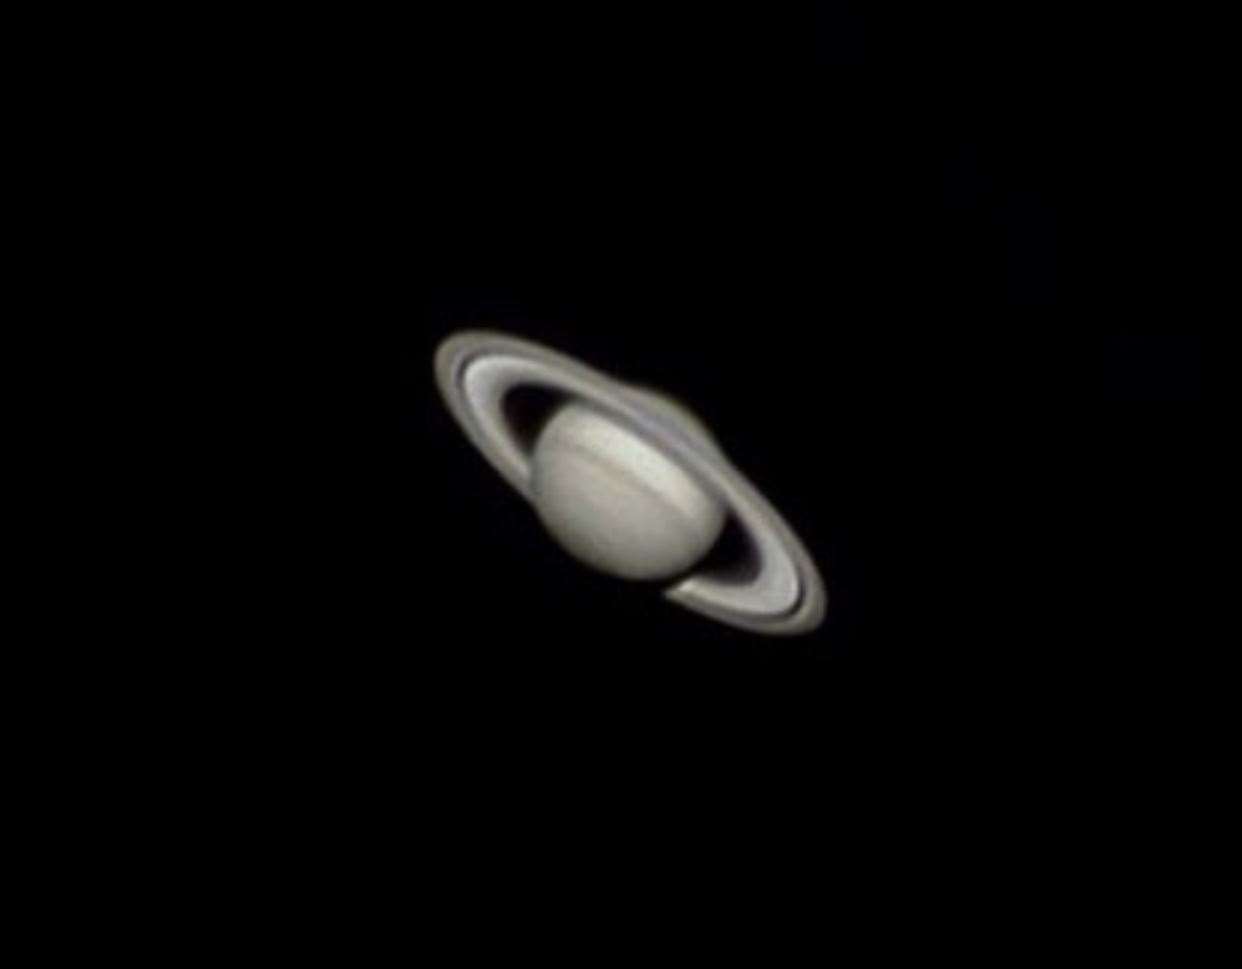 Mr Flanagan photographed the rings of Saturn from his back garden. Photo: James Flanagan